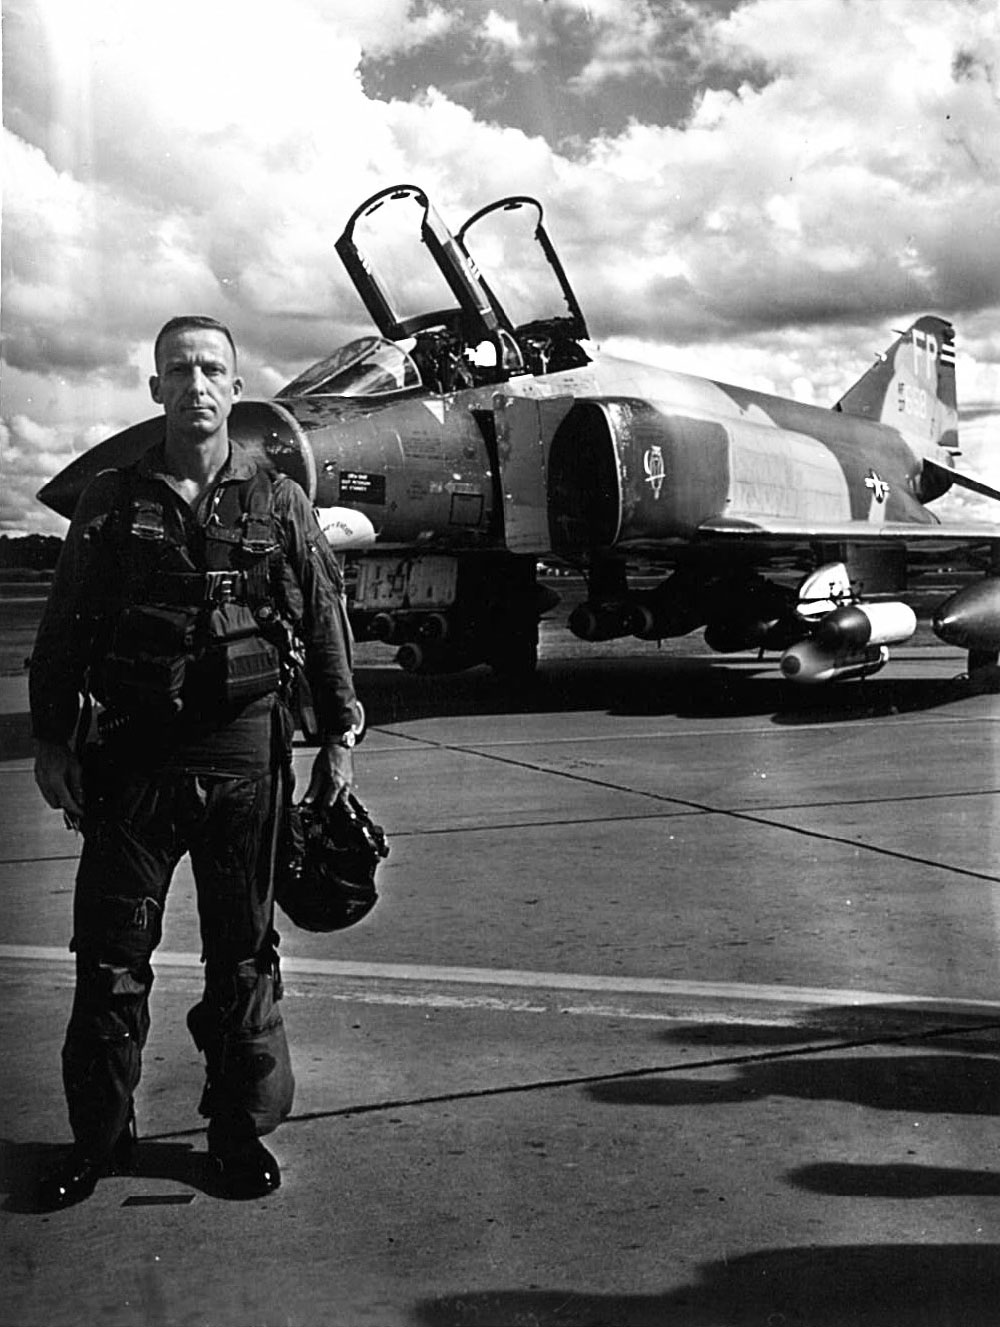 Black and white photo of a pilot standing in front of an F-4 Phantom fighter bomber.